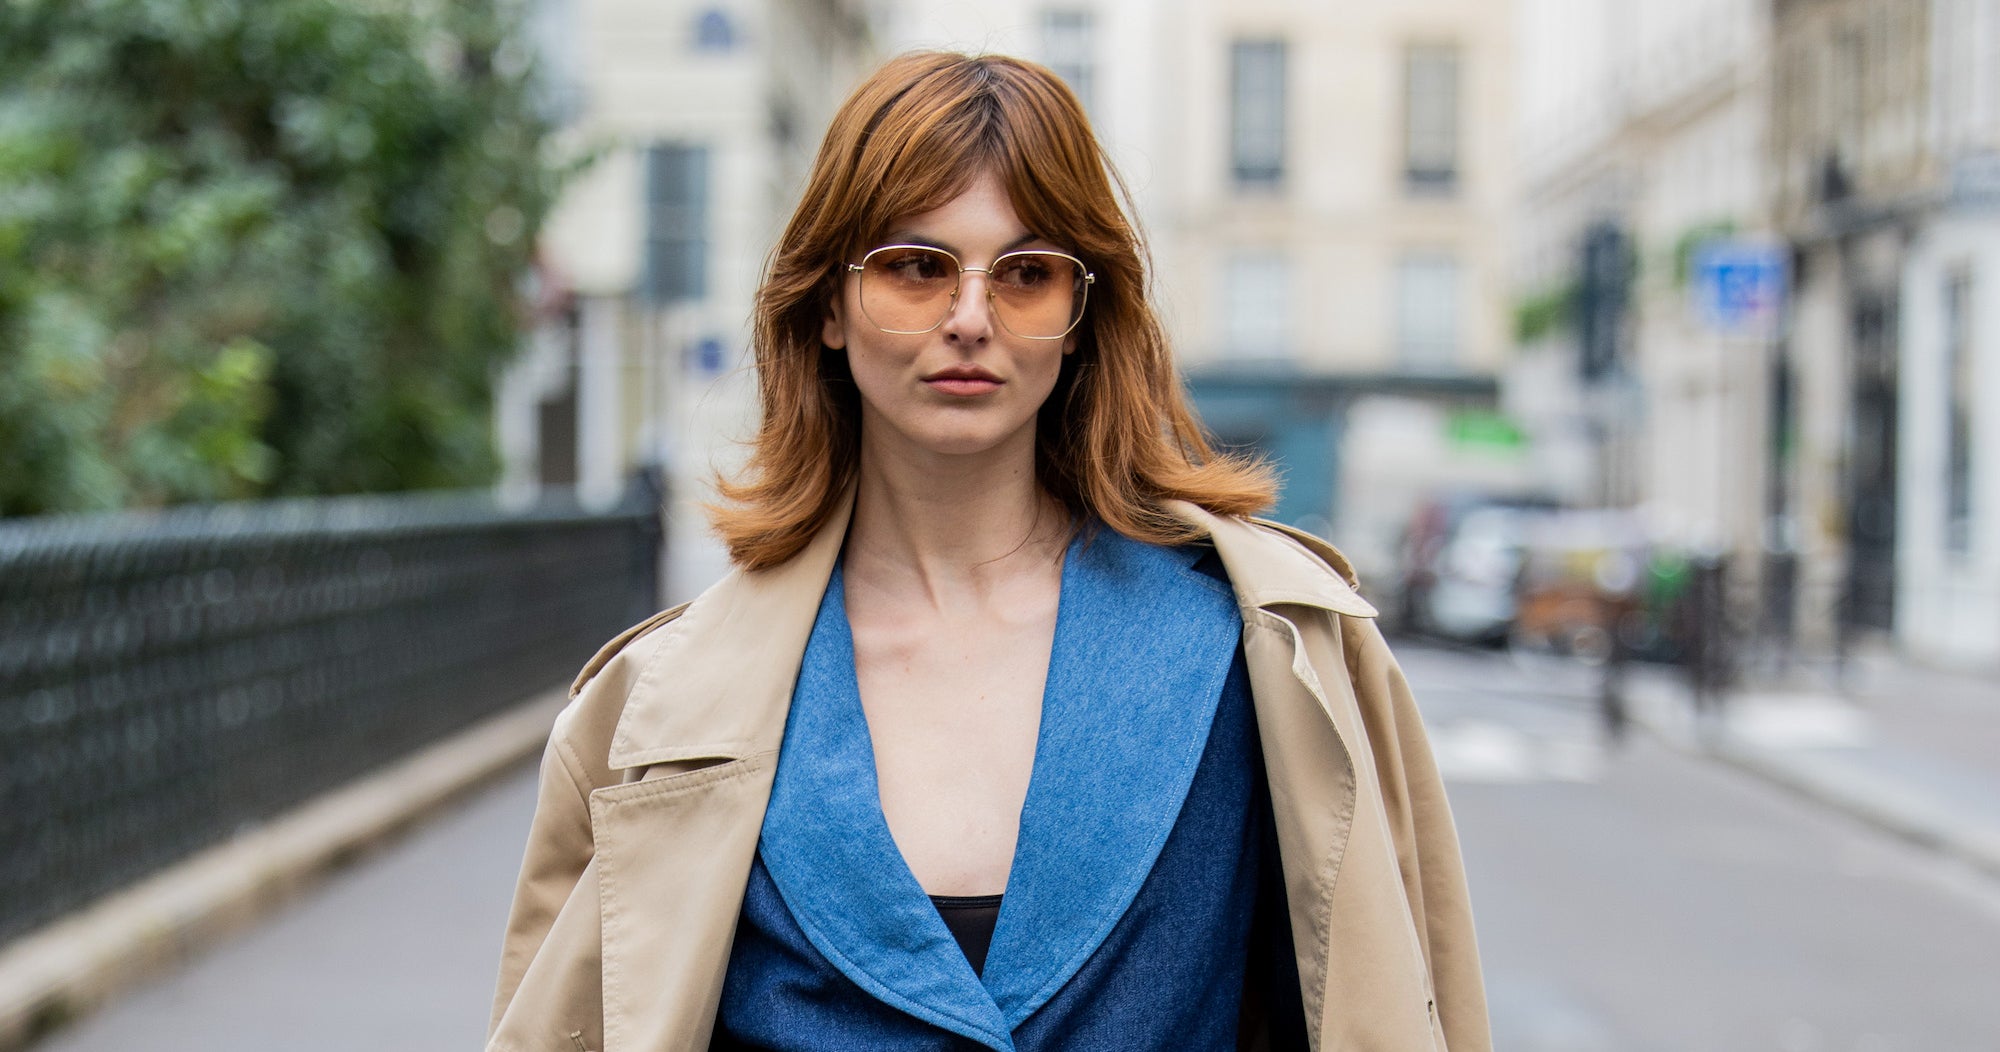 The Best Paris Fashion Week Haircut Trends, From Bobs To Invisible Layers